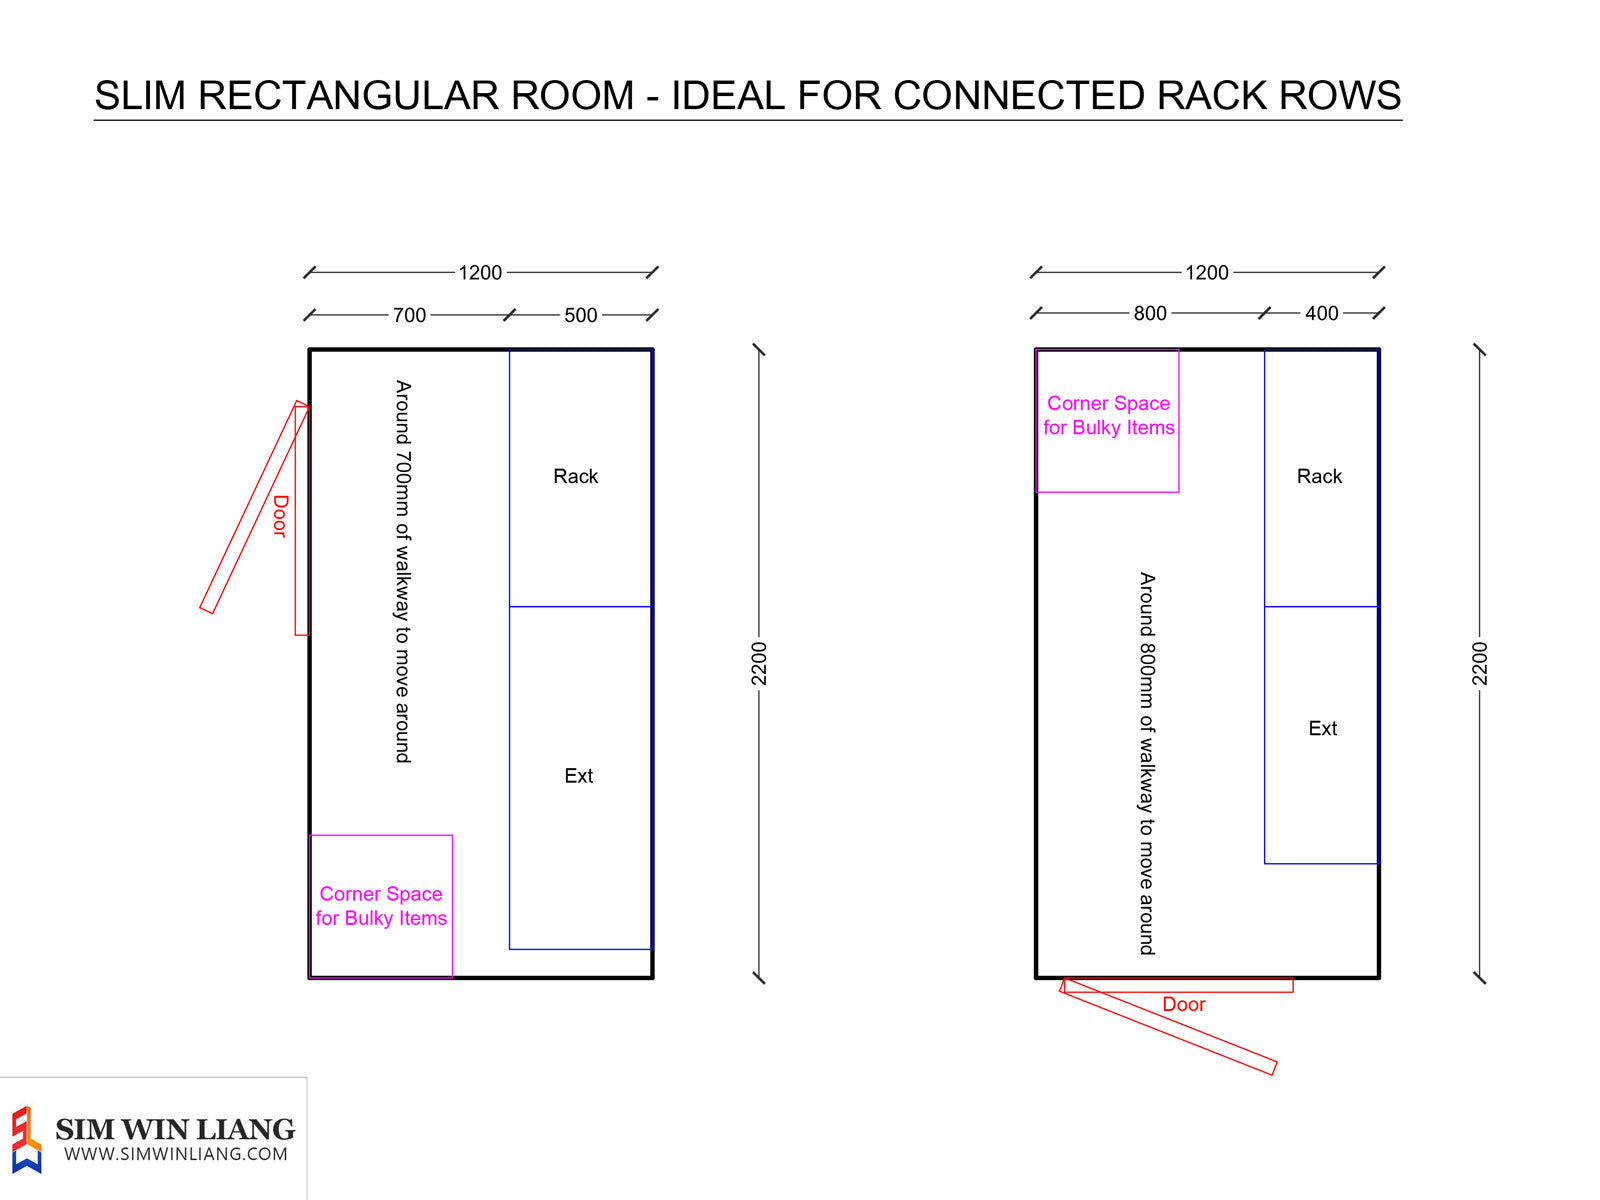 Recommended Storage Rack Layout for Slim Rectangular Storeroom in Singapore 2020 - SIM WIN LIANG